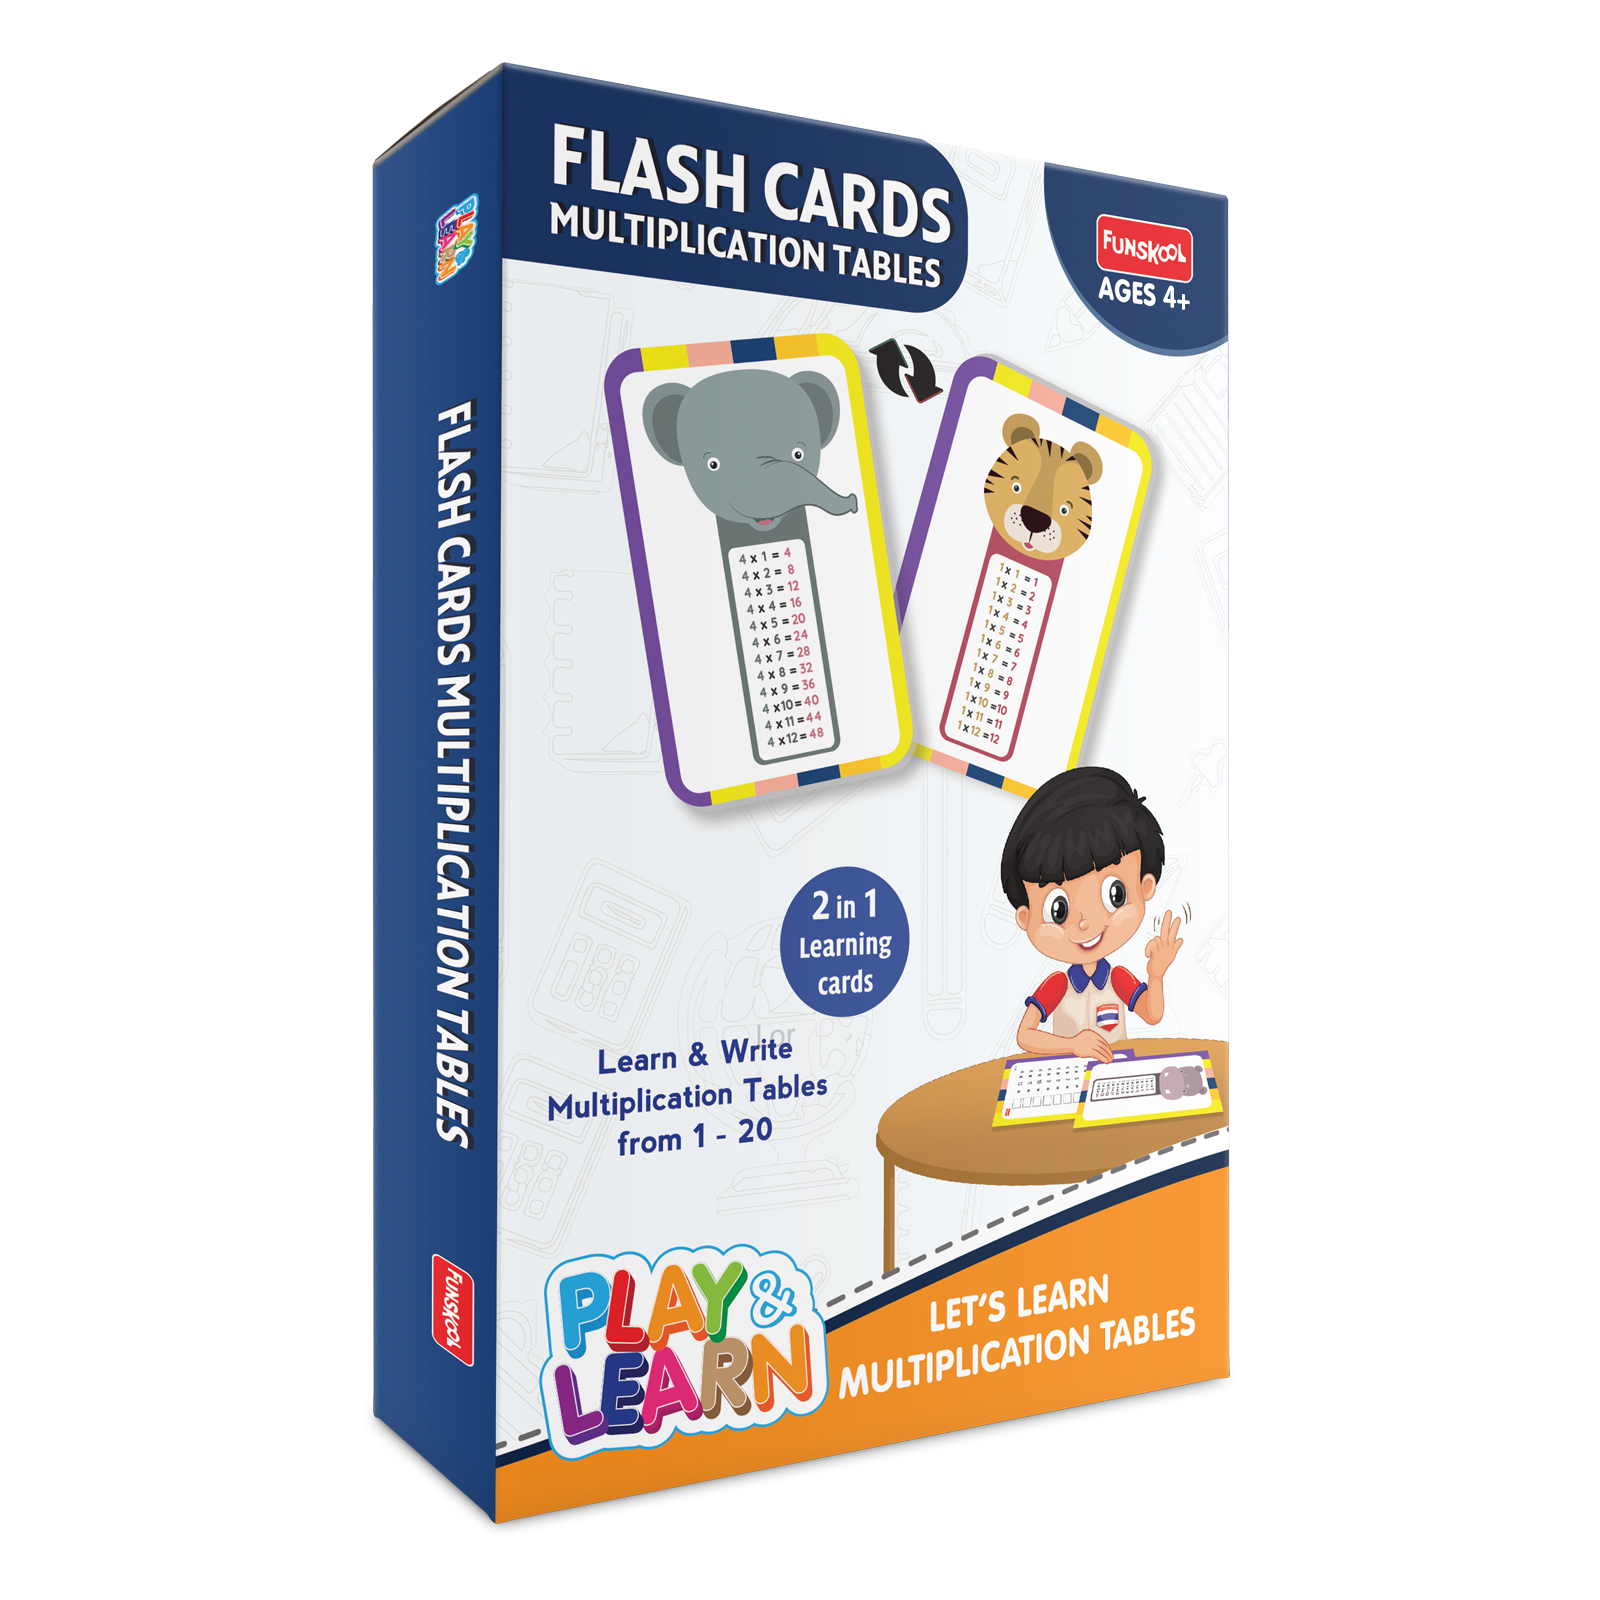 FLASH CARDS – MULTIPLICATION TABLE